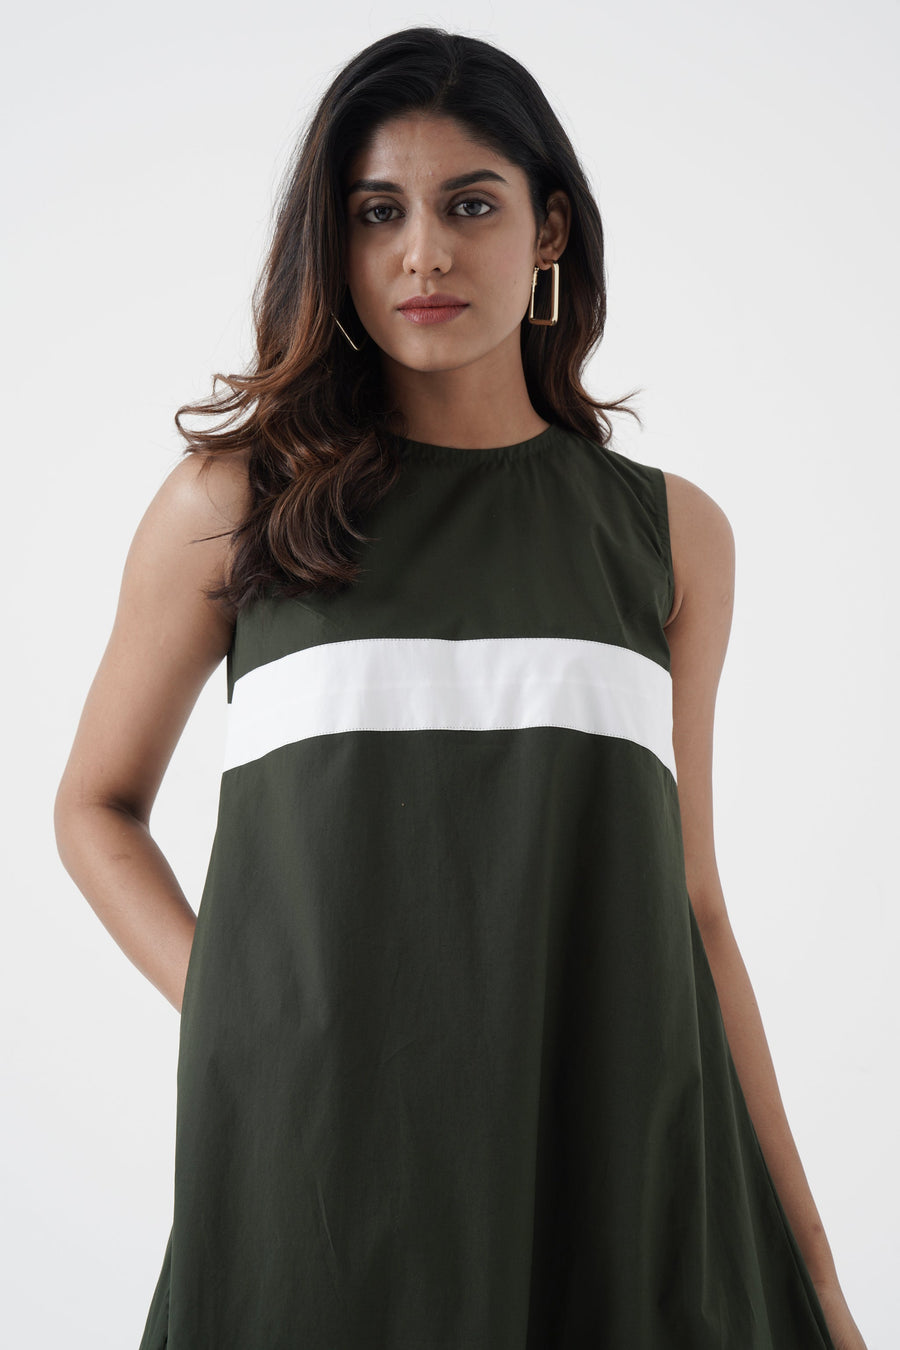 A Model Wearing Green Pure Cotton Eurythmic - White patti on chest dress - Green, curated by Only Ethikal